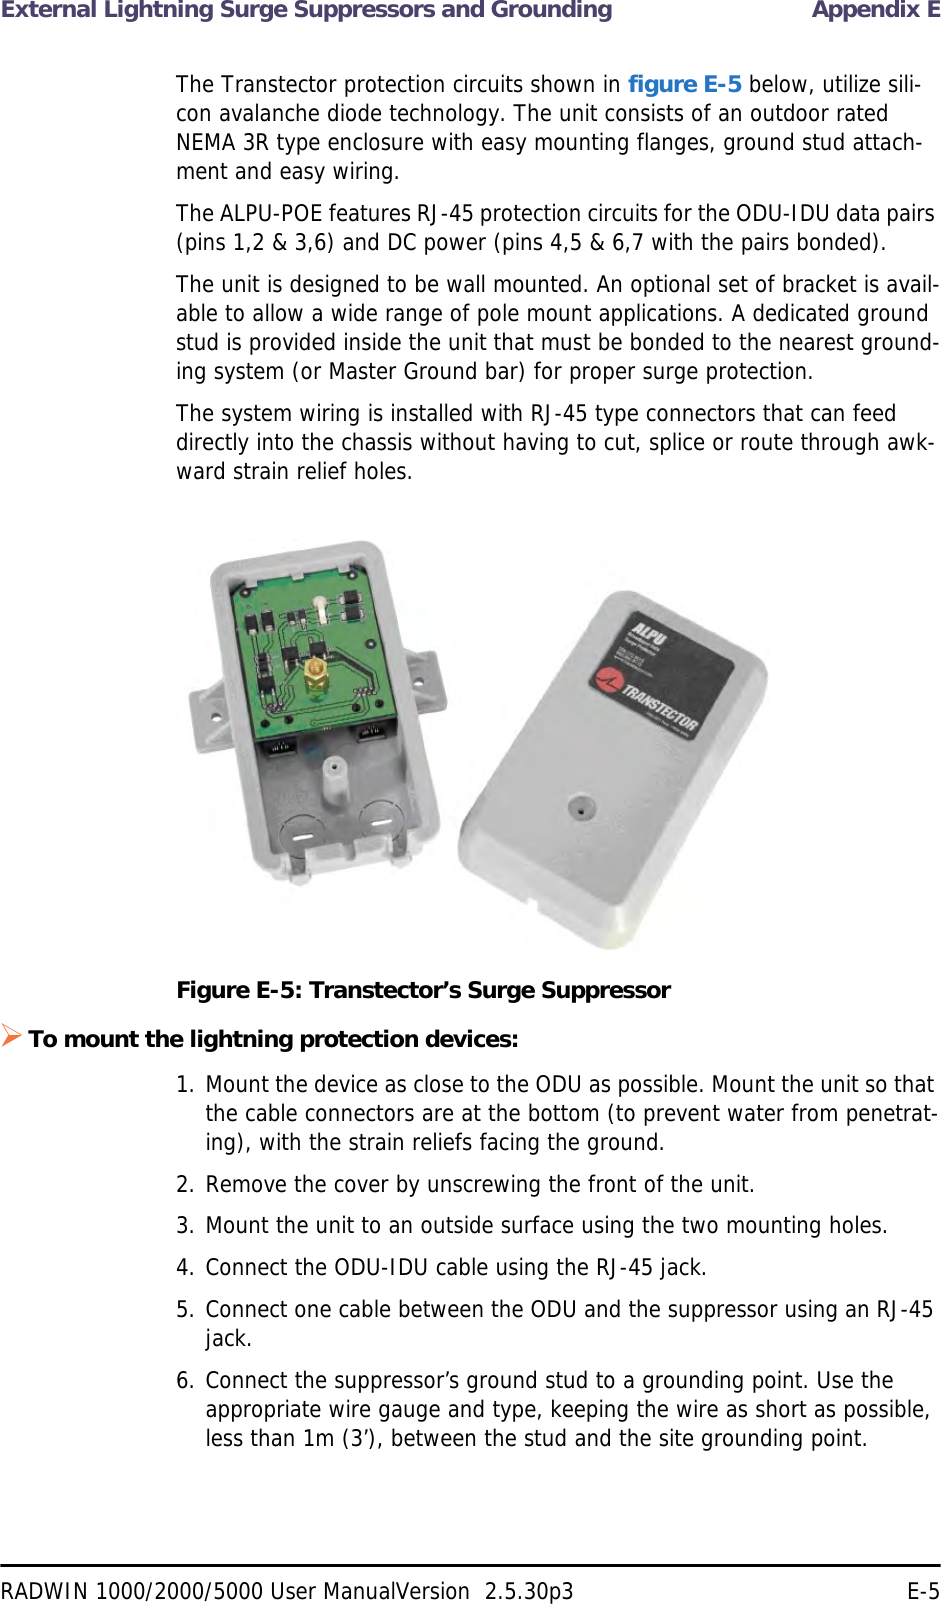 External Lightning Surge Suppressors and Grounding Appendix ERADWIN 1000/2000/5000 User ManualVersion  2.5.30p3 E-5The Transtector protection circuits shown in figure E-5 below, utilize sili-con avalanche diode technology. The unit consists of an outdoor rated NEMA 3R type enclosure with easy mounting flanges, ground stud attach-ment and easy wiring.The ALPU-POE features RJ-45 protection circuits for the ODU-IDU data pairs (pins 1,2 &amp; 3,6) and DC power (pins 4,5 &amp; 6,7 with the pairs bonded).The unit is designed to be wall mounted. An optional set of bracket is avail-able to allow a wide range of pole mount applications. A dedicated ground stud is provided inside the unit that must be bonded to the nearest ground-ing system (or Master Ground bar) for proper surge protection.The system wiring is installed with RJ-45 type connectors that can feed directly into the chassis without having to cut, splice or route through awk-ward strain relief holes.Figure E-5: Transtector’s Surge SuppressorTo mount the lightning protection devices:1. Mount the device as close to the ODU as possible. Mount the unit so that the cable connectors are at the bottom (to prevent water from penetrat-ing), with the strain reliefs facing the ground.2. Remove the cover by unscrewing the front of the unit.3. Mount the unit to an outside surface using the two mounting holes.4. Connect the ODU-IDU cable using the RJ-45 jack.5. Connect one cable between the ODU and the suppressor using an RJ-45 jack.6. Connect the suppressor’s ground stud to a grounding point. Use the appropriate wire gauge and type, keeping the wire as short as possible, less than 1m (3’), between the stud and the site grounding point.